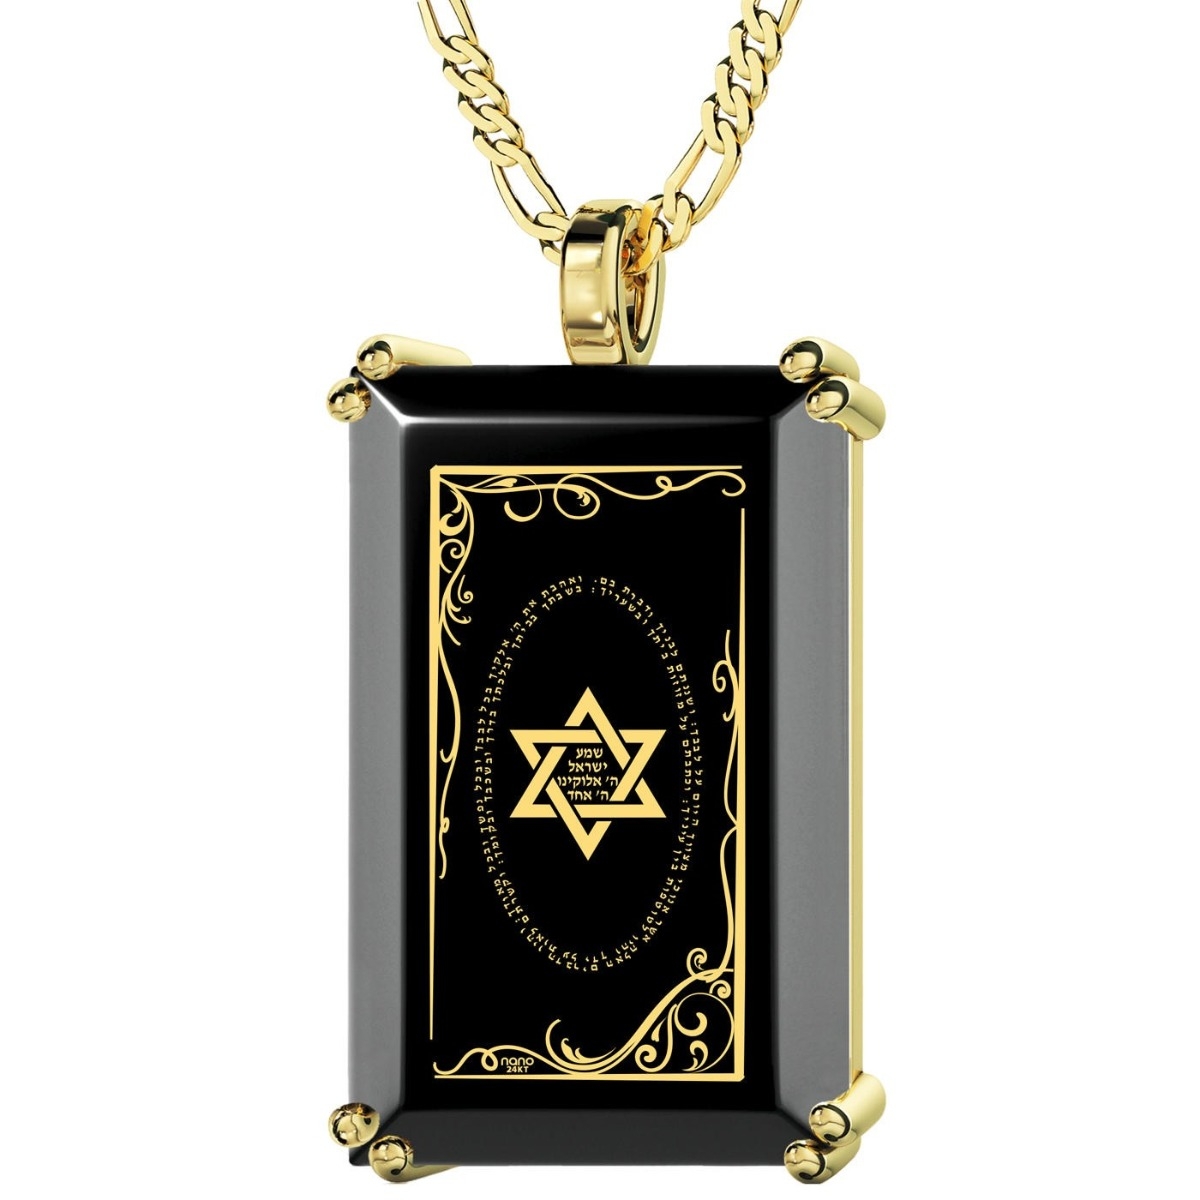 Gold-Plated Men's Onyx Necklace with Micro-Inscribed Star of David and Shema Yisrael - Deuteronomy 6:4 - 1